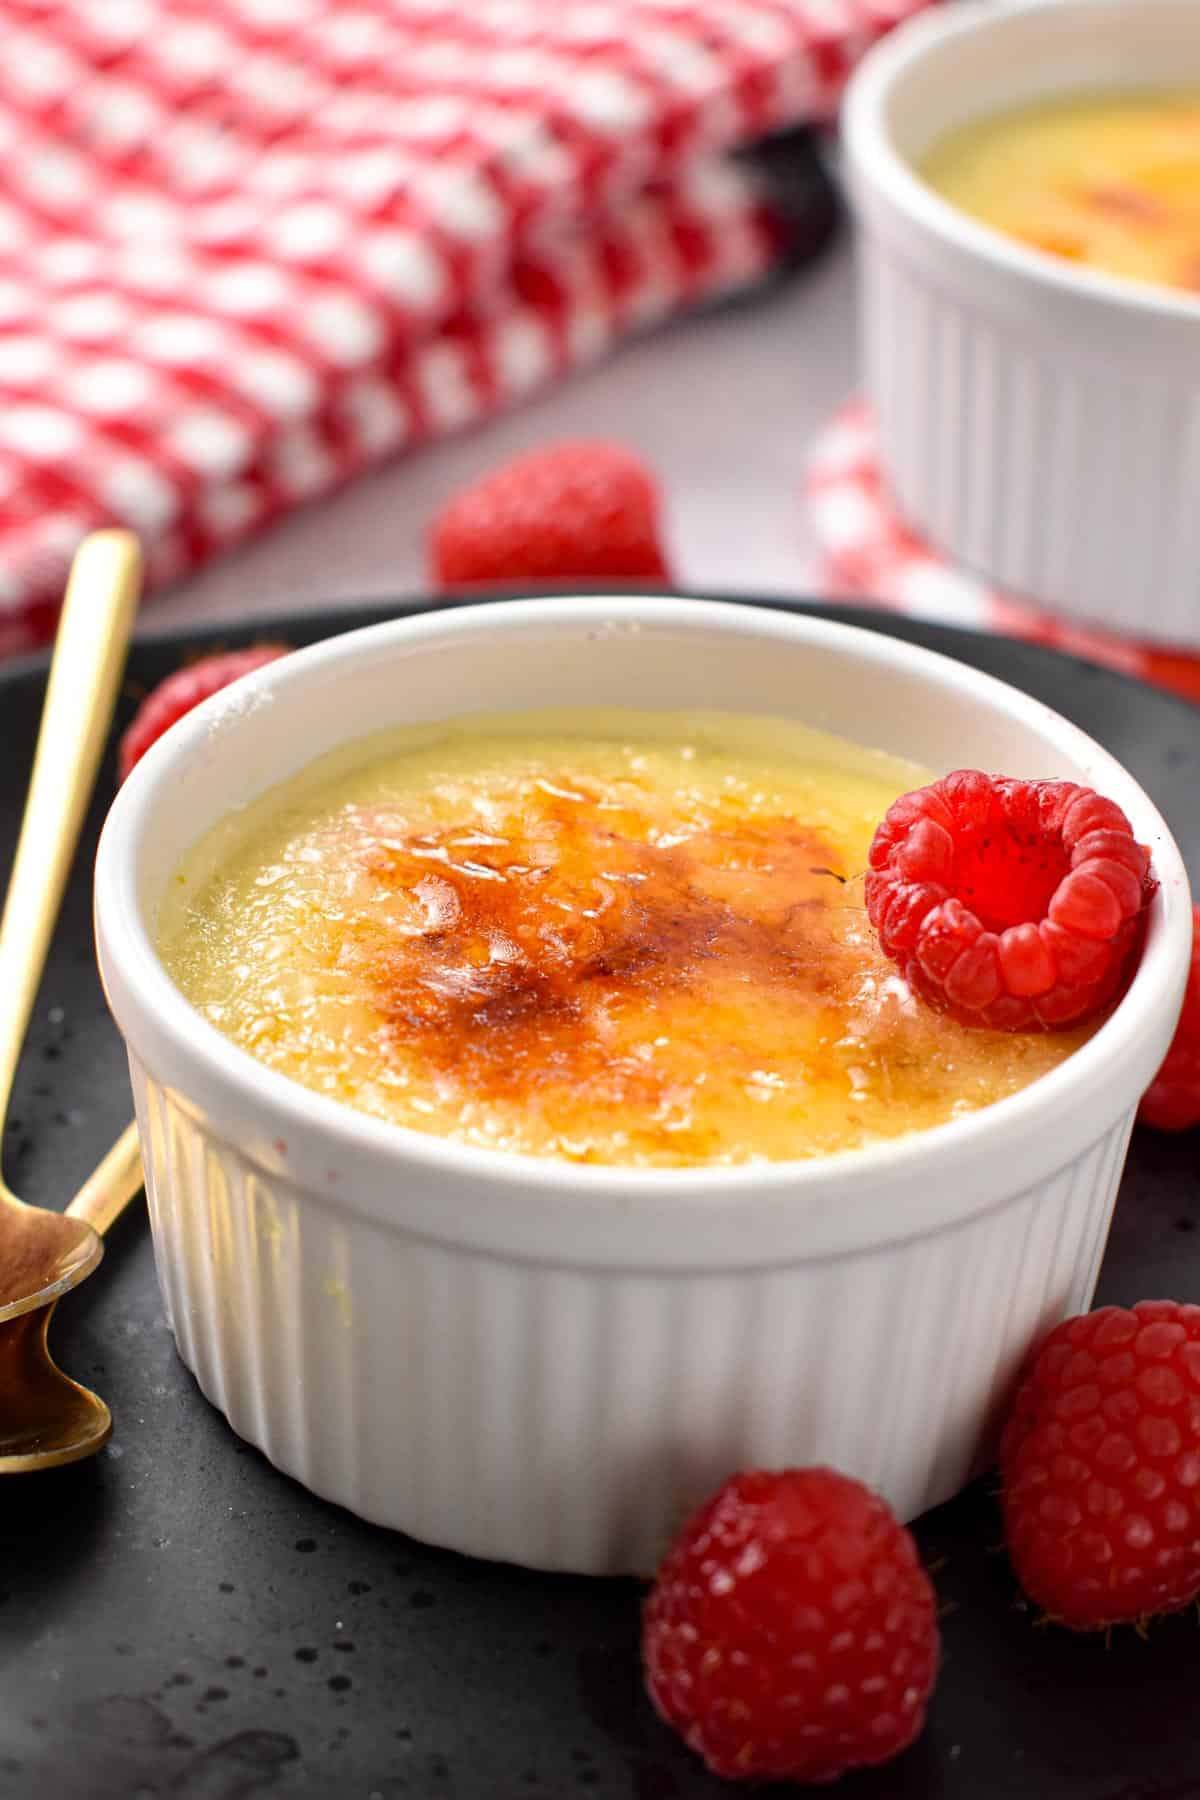 A ramekin filled with a creme brulee mixture topped with crunchy caramel golden layer and a fresh raspberry on the side.